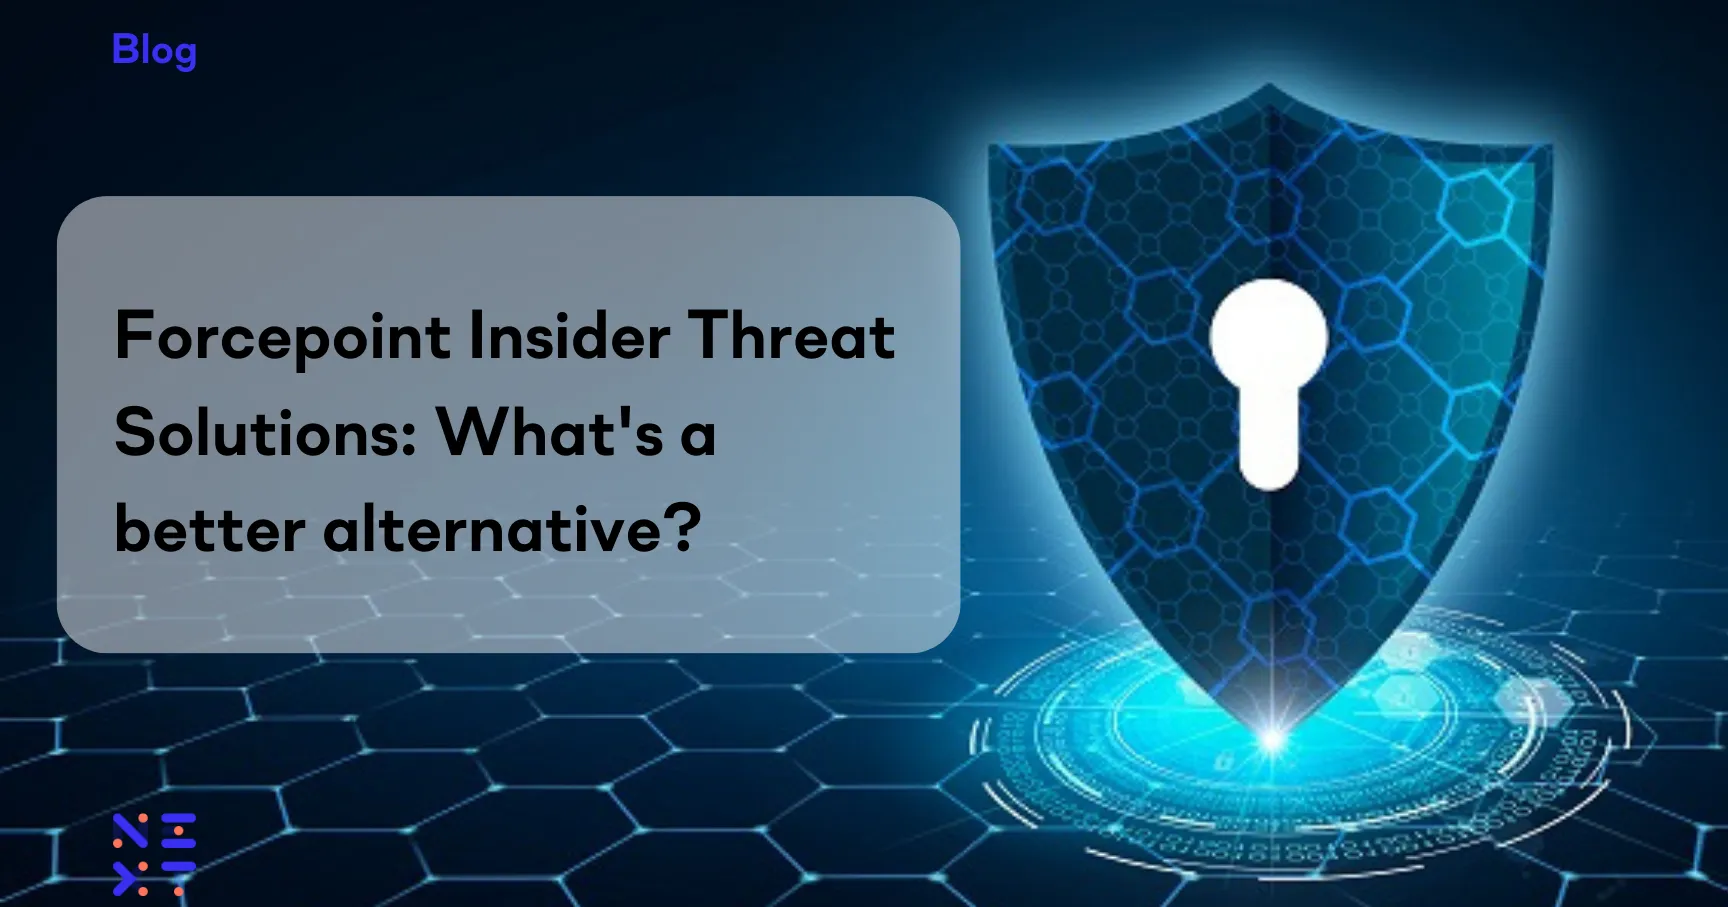 Forcepoint Insider Threat Solutions: What's a better alternative?